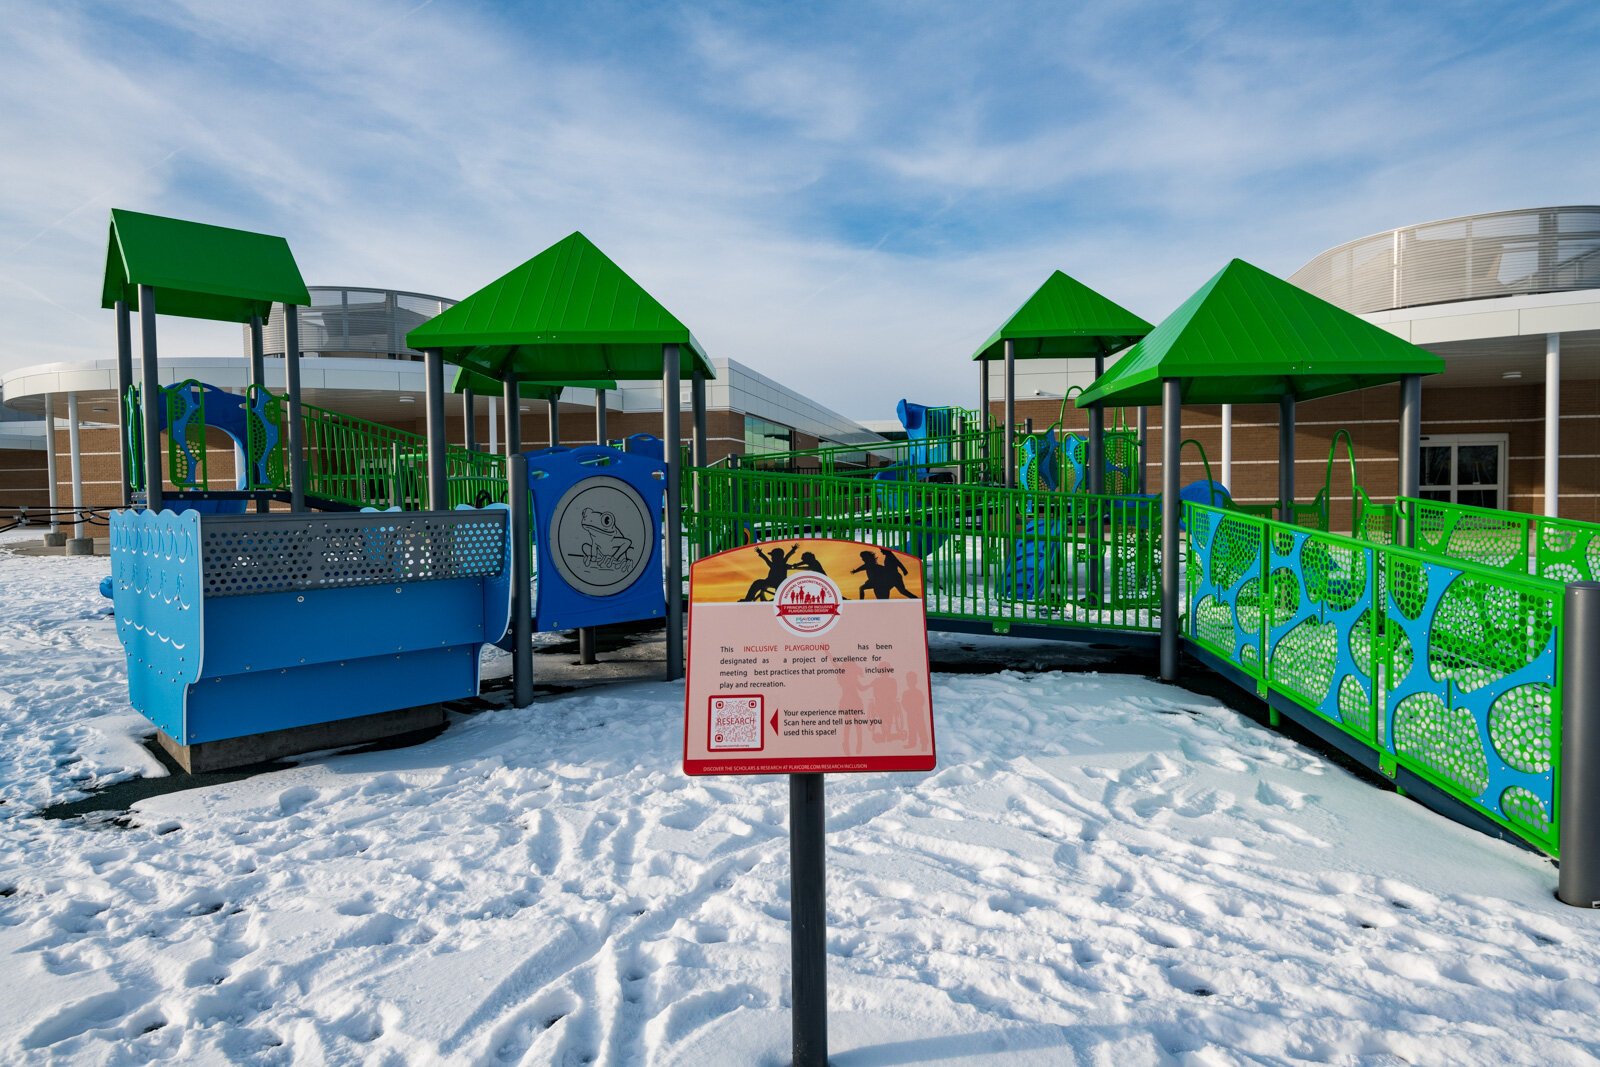 The inclusive playground at High Point School.